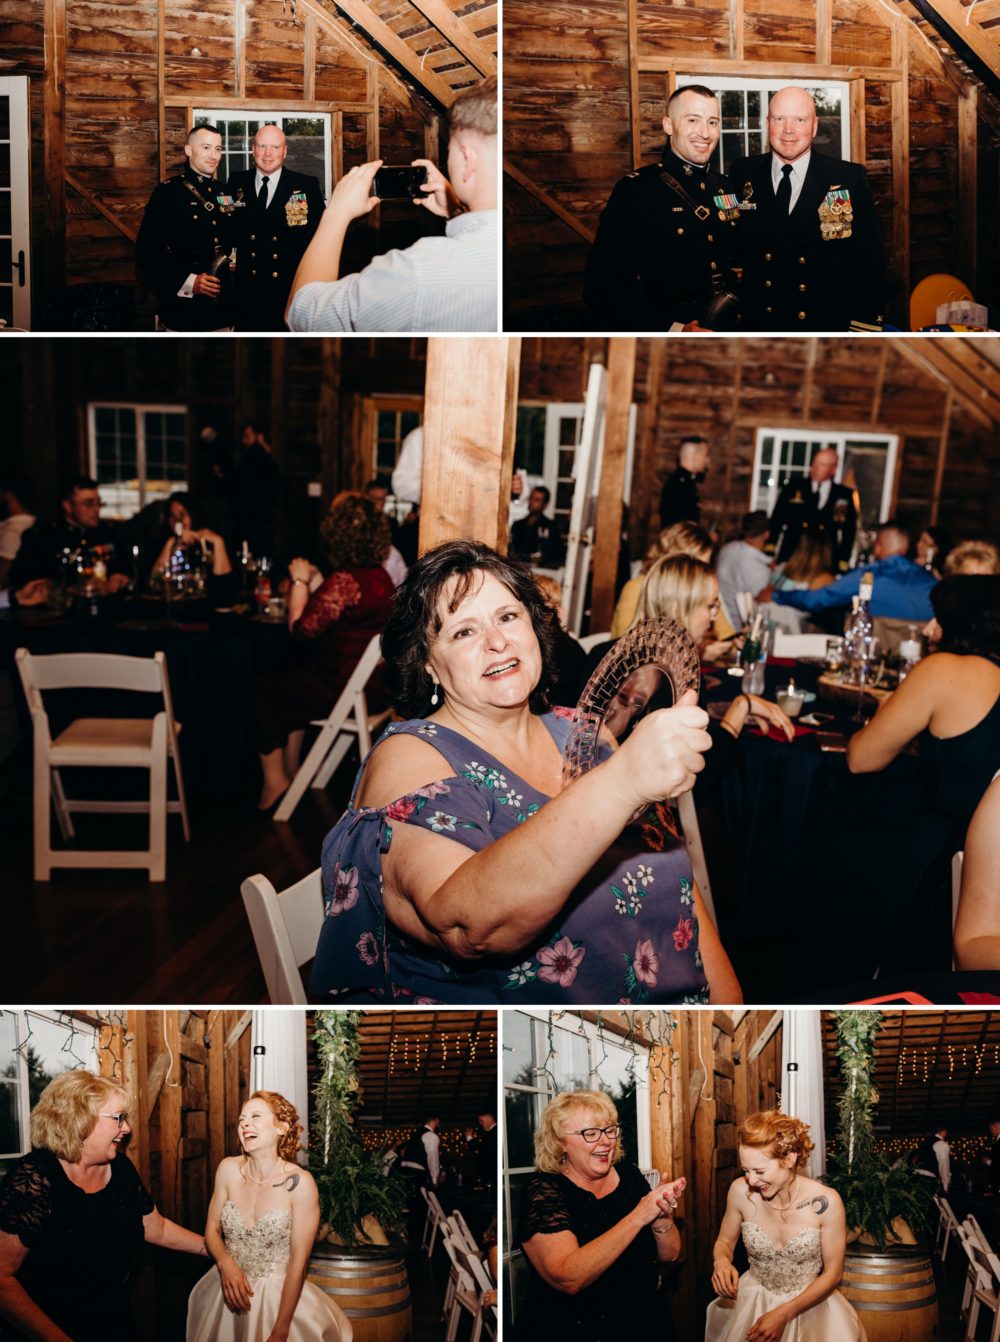 Guests at the wedding reception - Bostic Lake Ranch Wedding in Redmond, WA by Briana Morrison